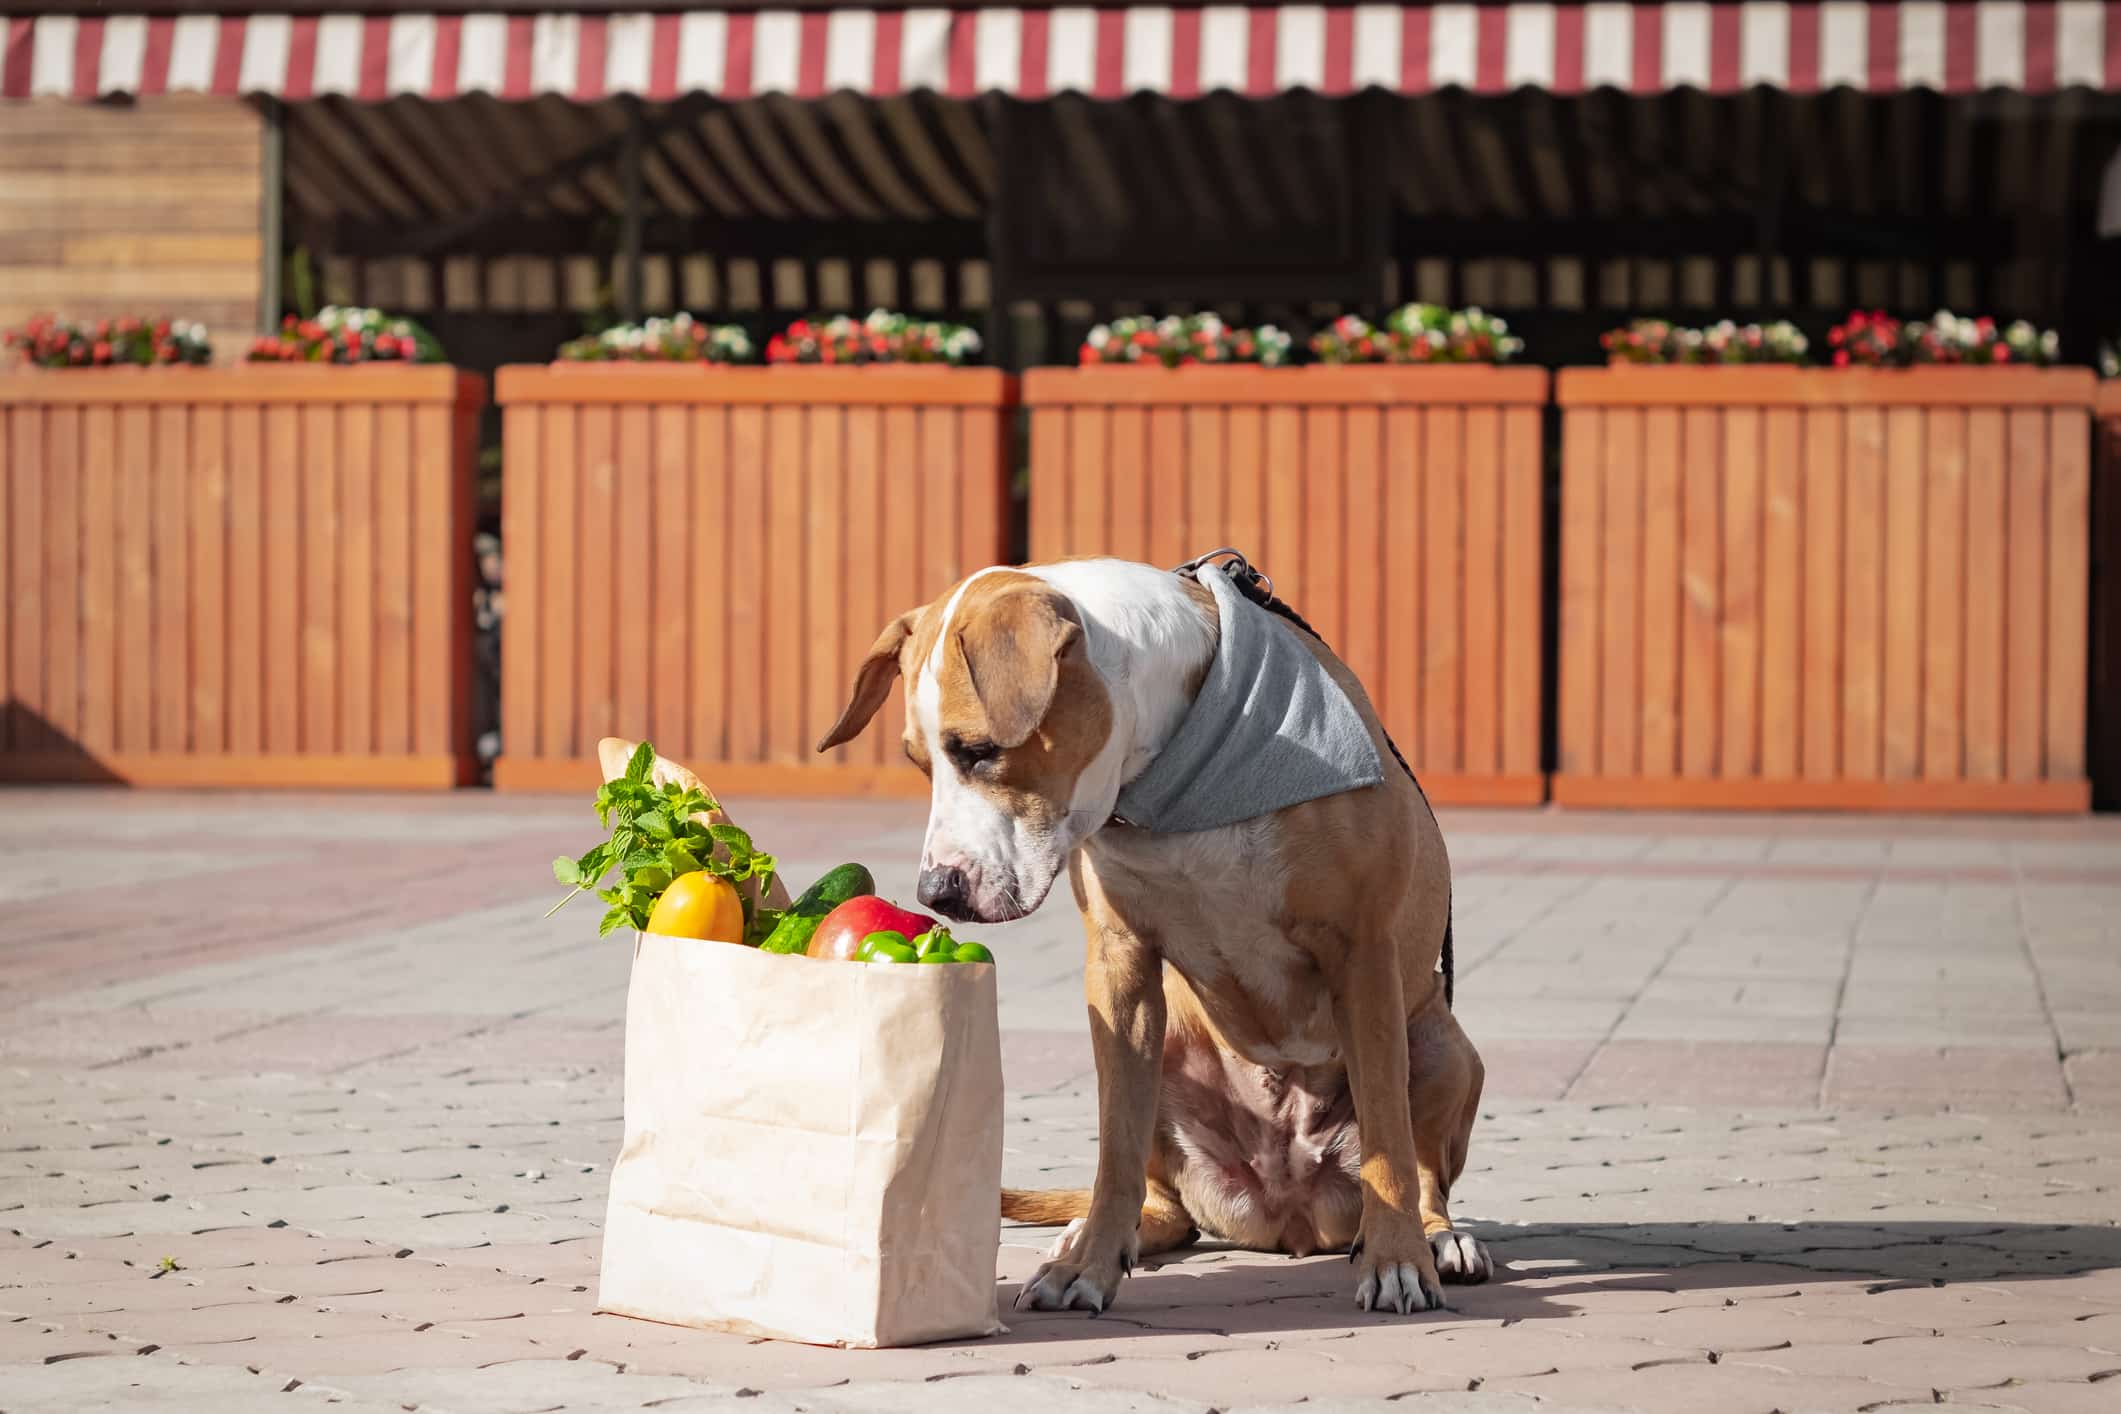 Funny dog and bag of groceries in front of market or local store.